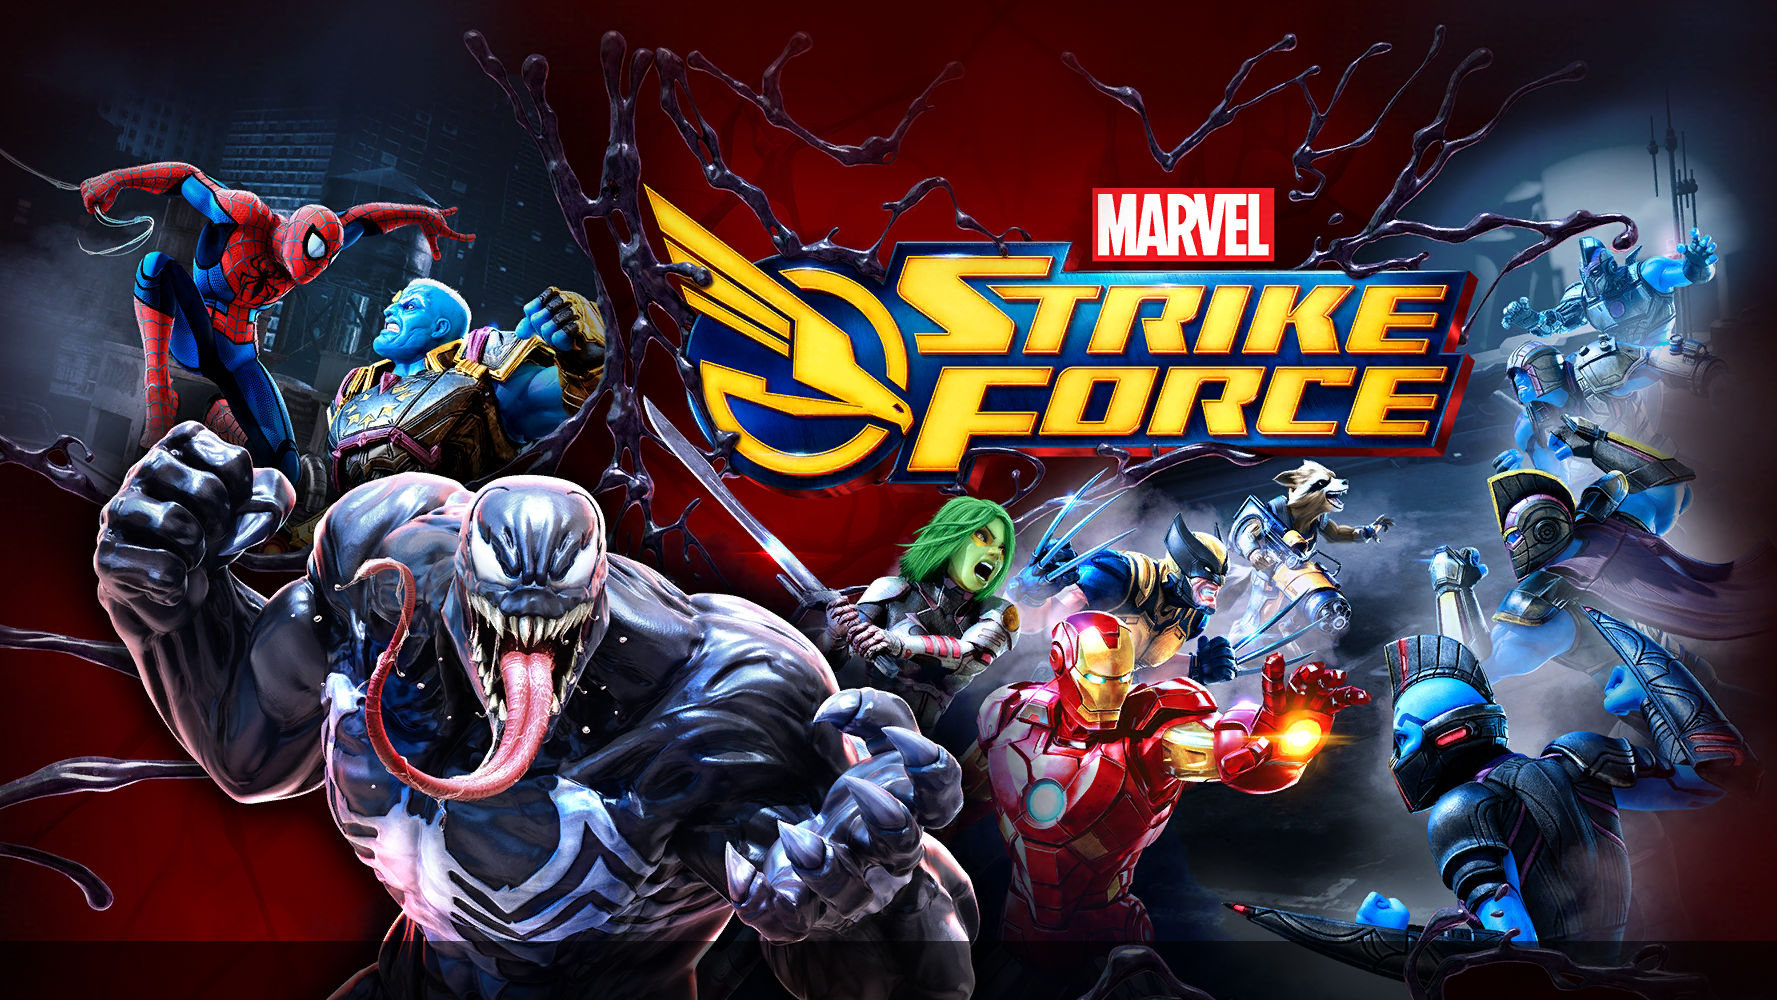 Marvel Strike Force Stark Tech Guide: How to Improve Your Characters Even More